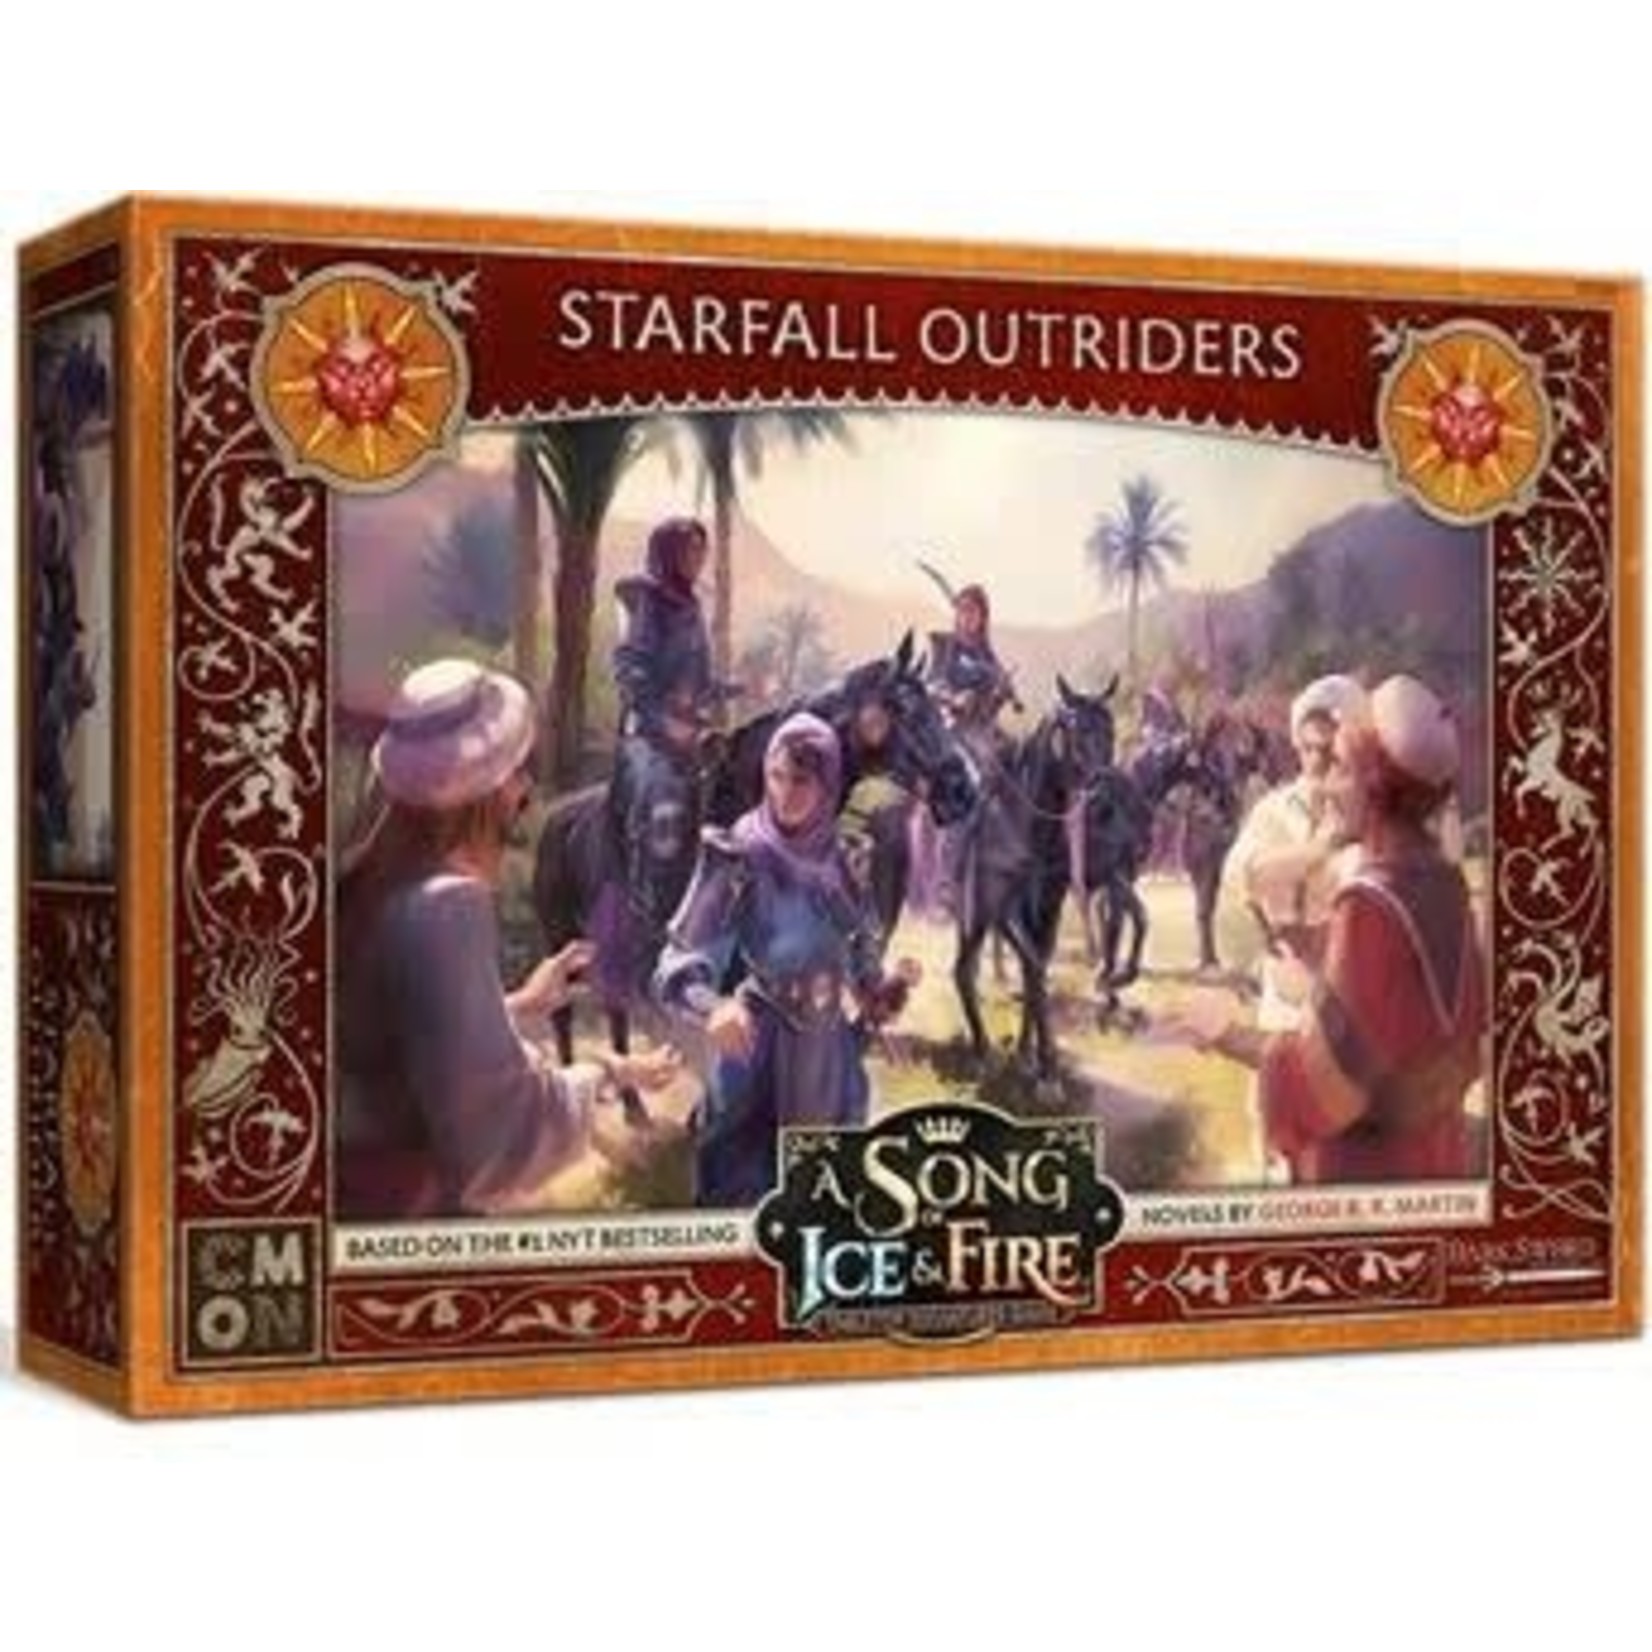 A Song of Ice & Fire: Starfall Outriders